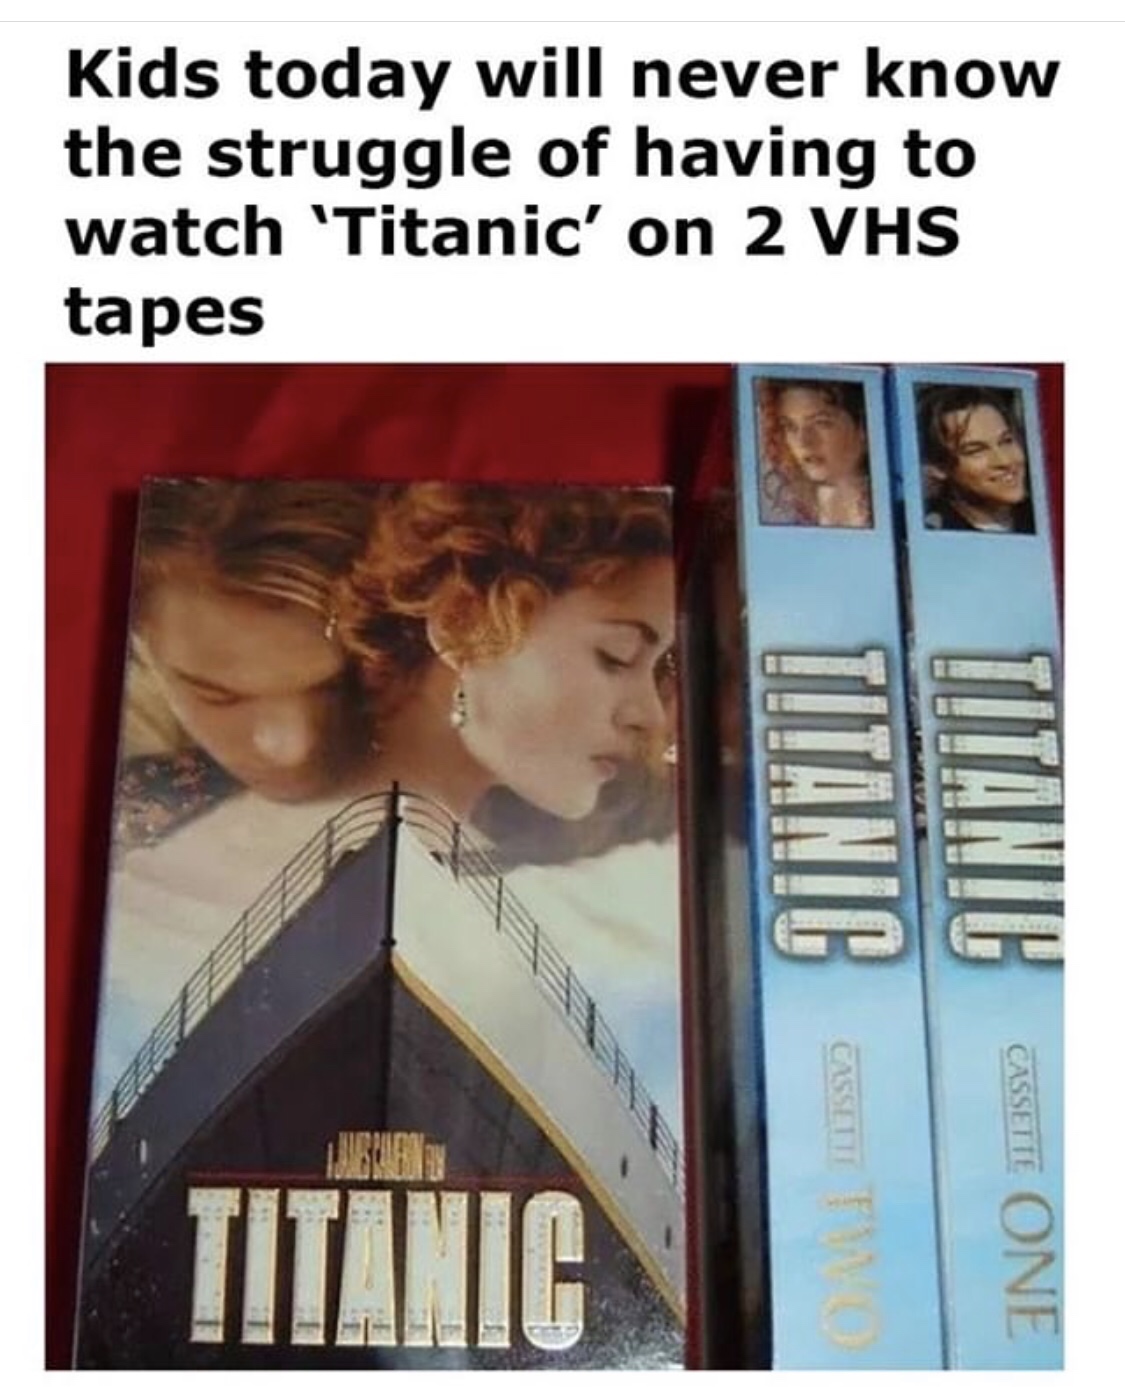 titanic movie - Kids today will never know the struggle of having to watch 'Titanic' on 2 Vhs tapes Titanic am One Cassette